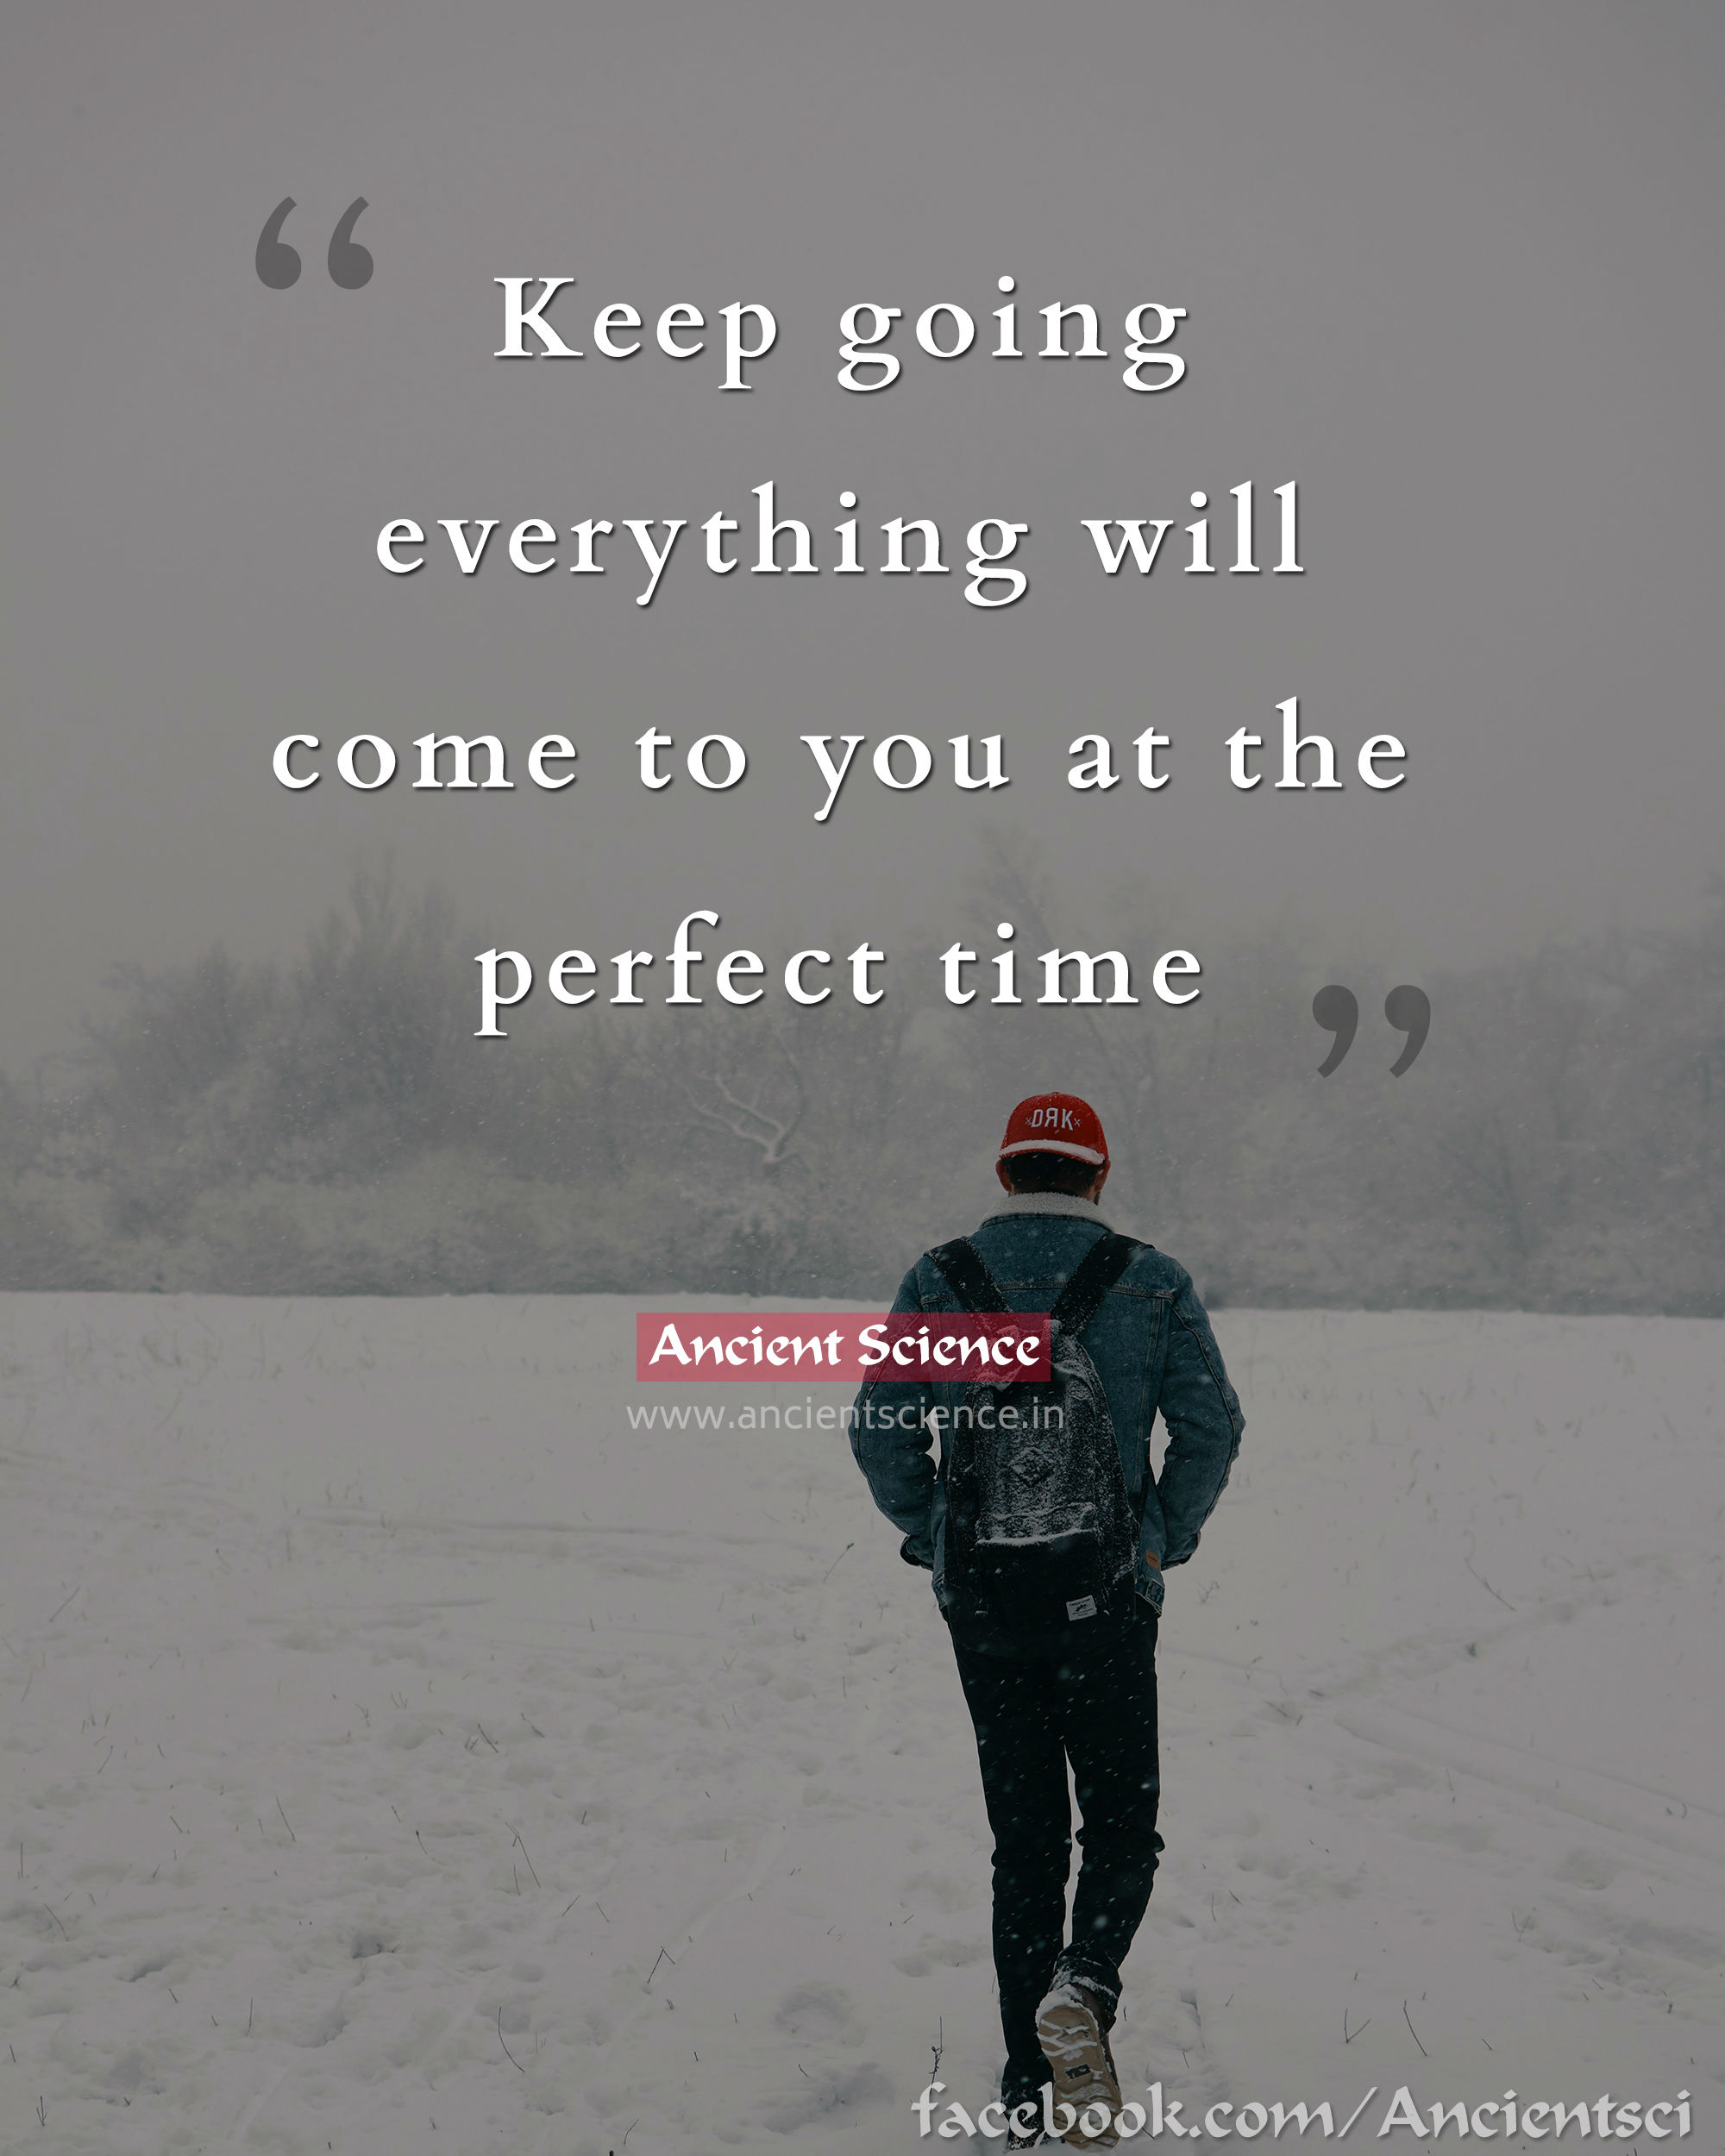 keep going everything will come to you at the perfect time.